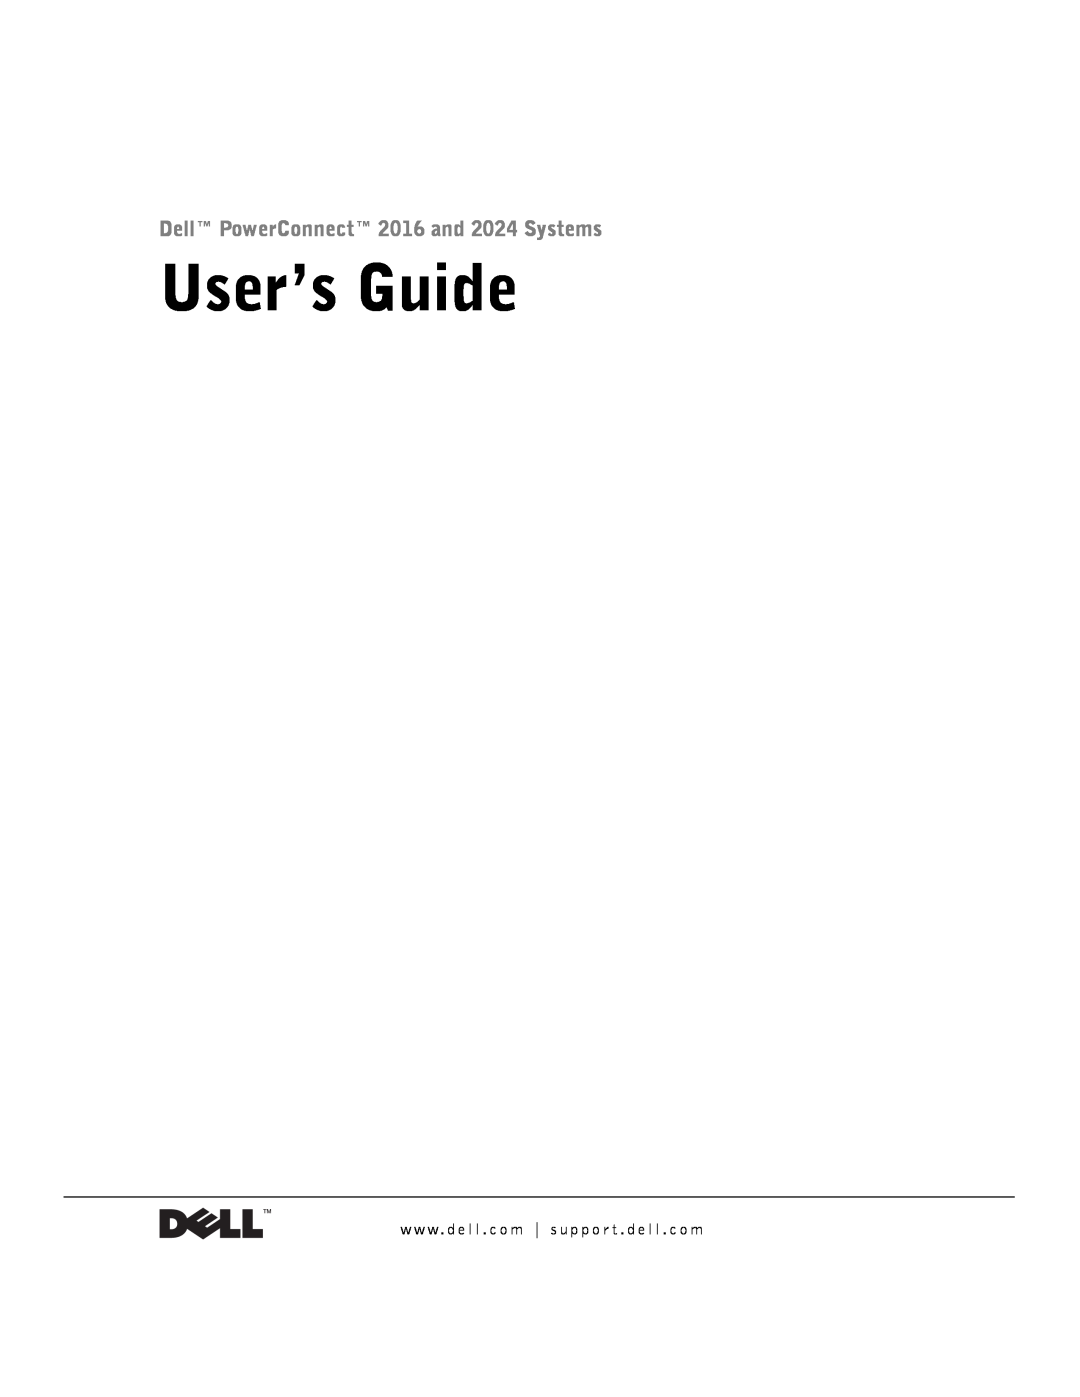 Dell 2016, 2024 manual User’s Guide, Dell PowerConnect 2016 and 2024 Systems 